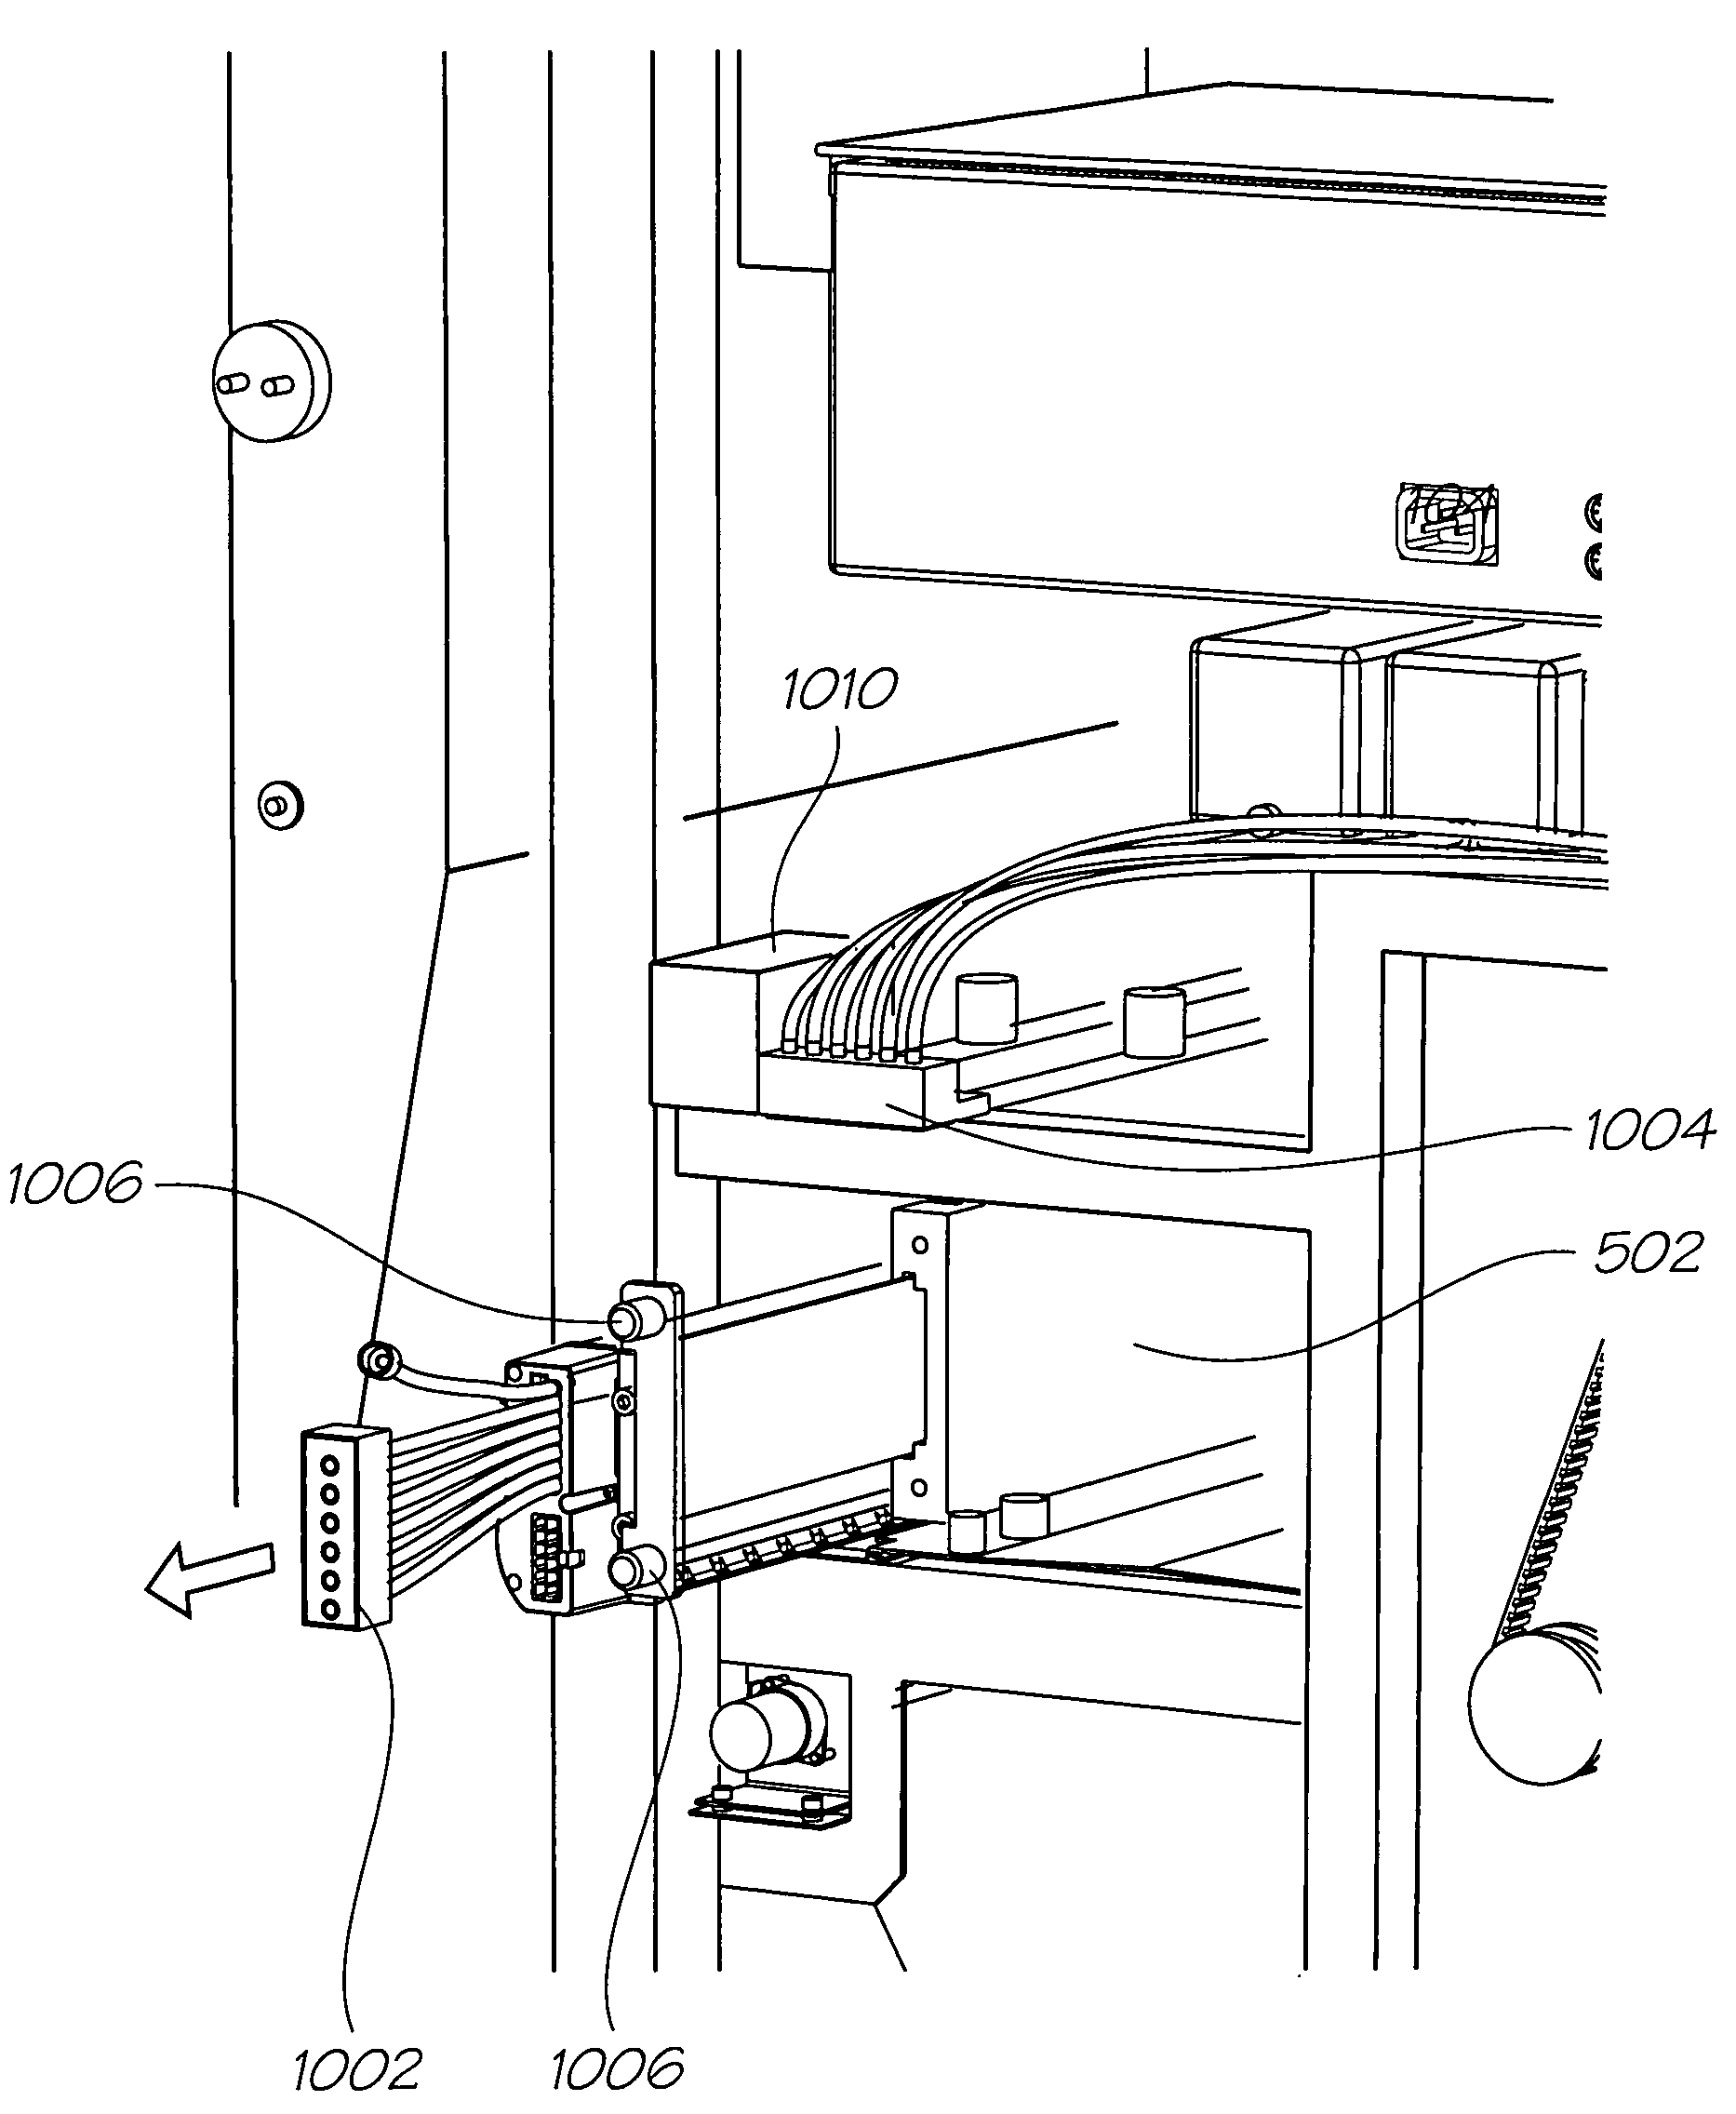 Removable printhead assembly for a wallpaper printer